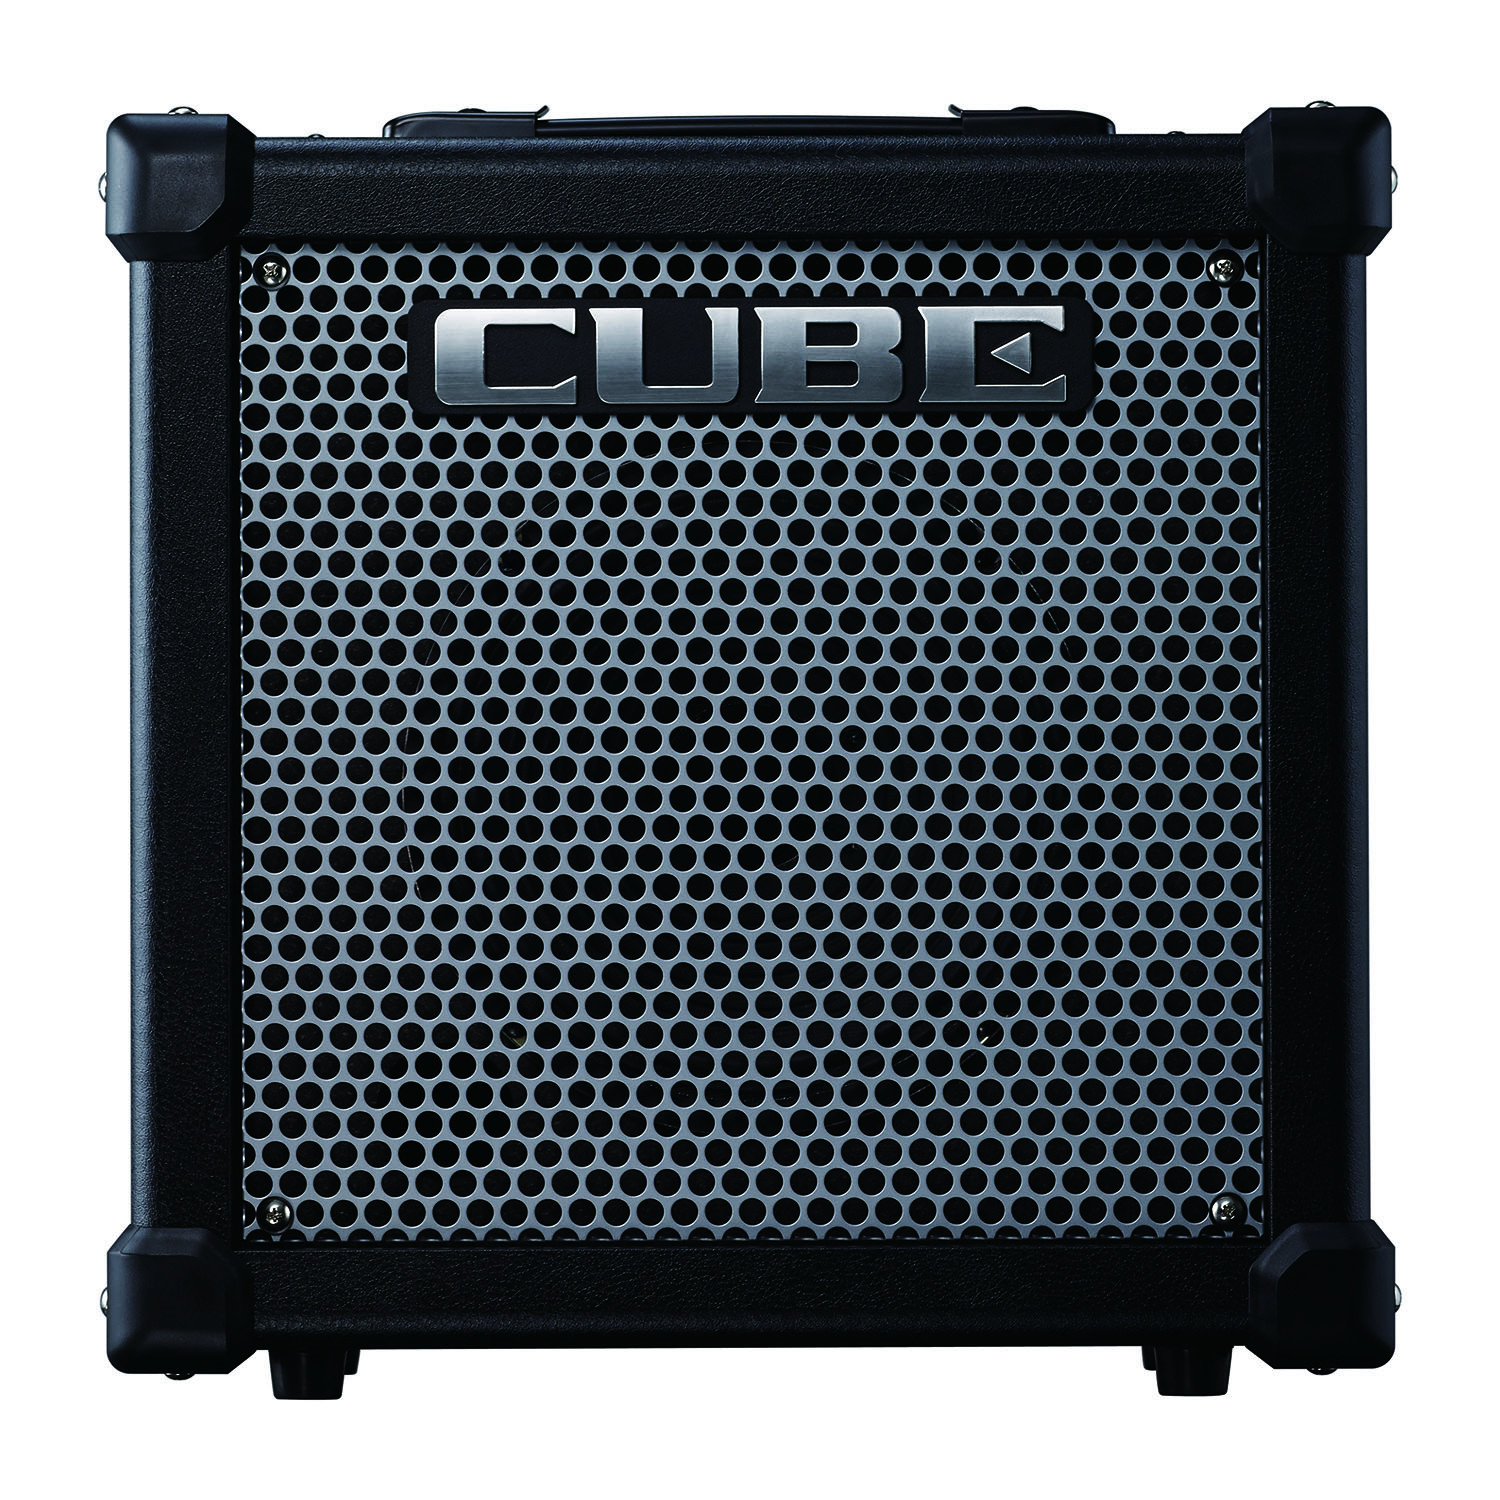 roland cube 20 review